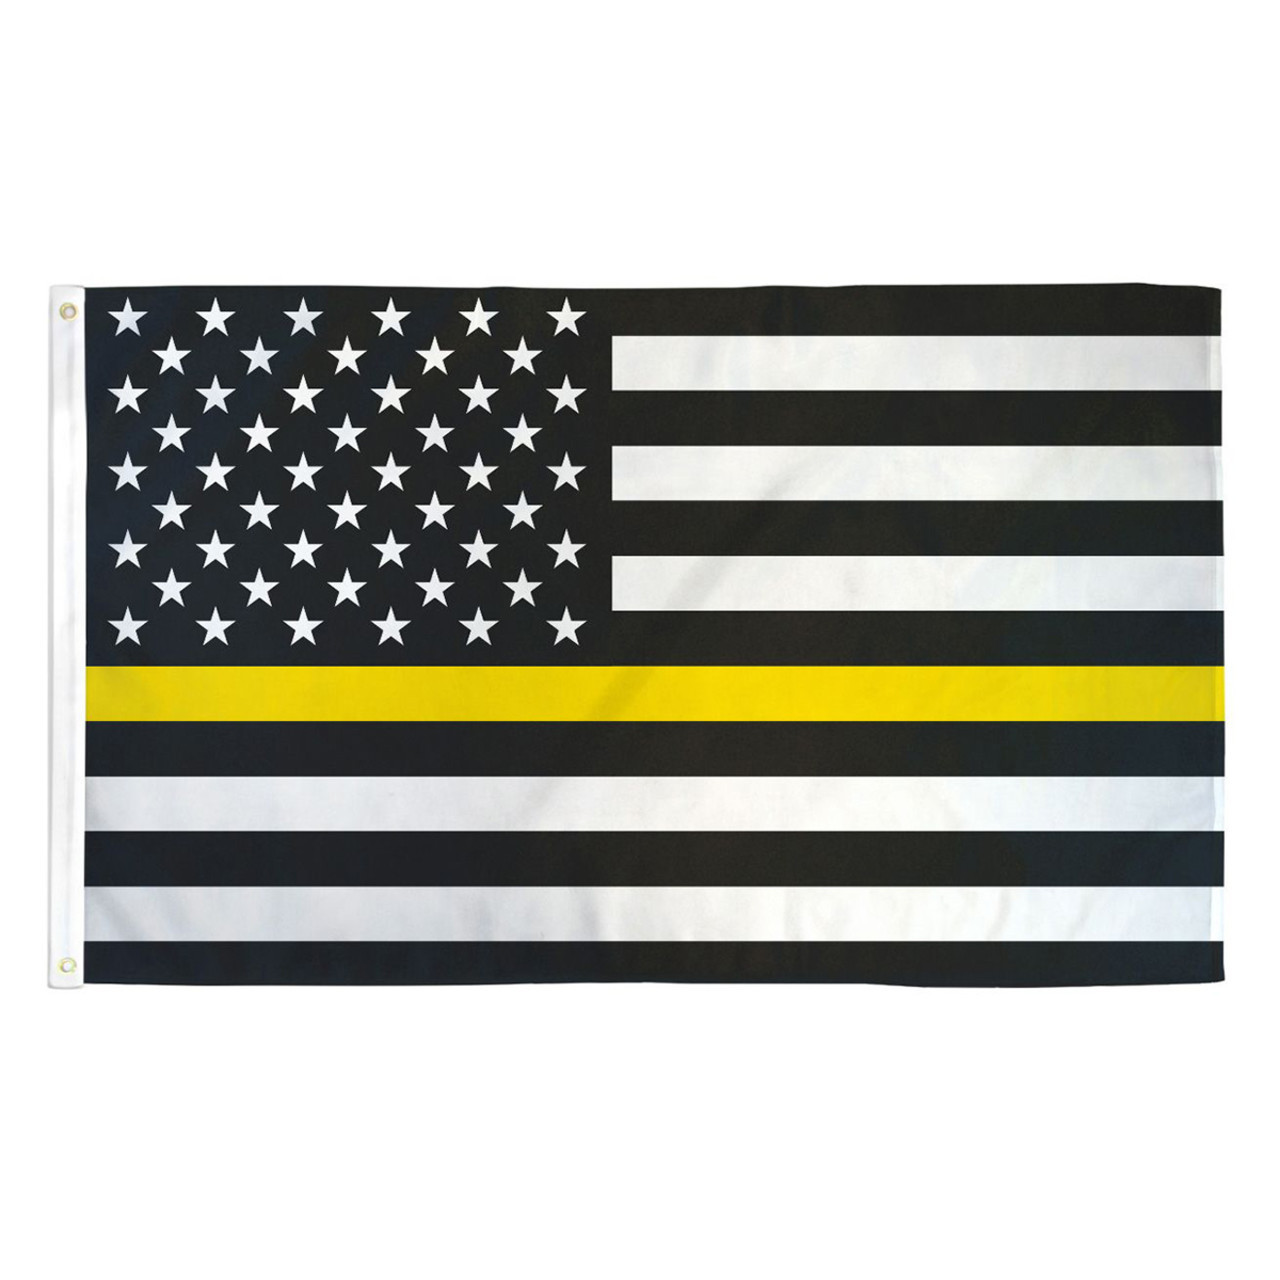 Thin Yellow Line Tow Lives Flag - Tow Lives Matter